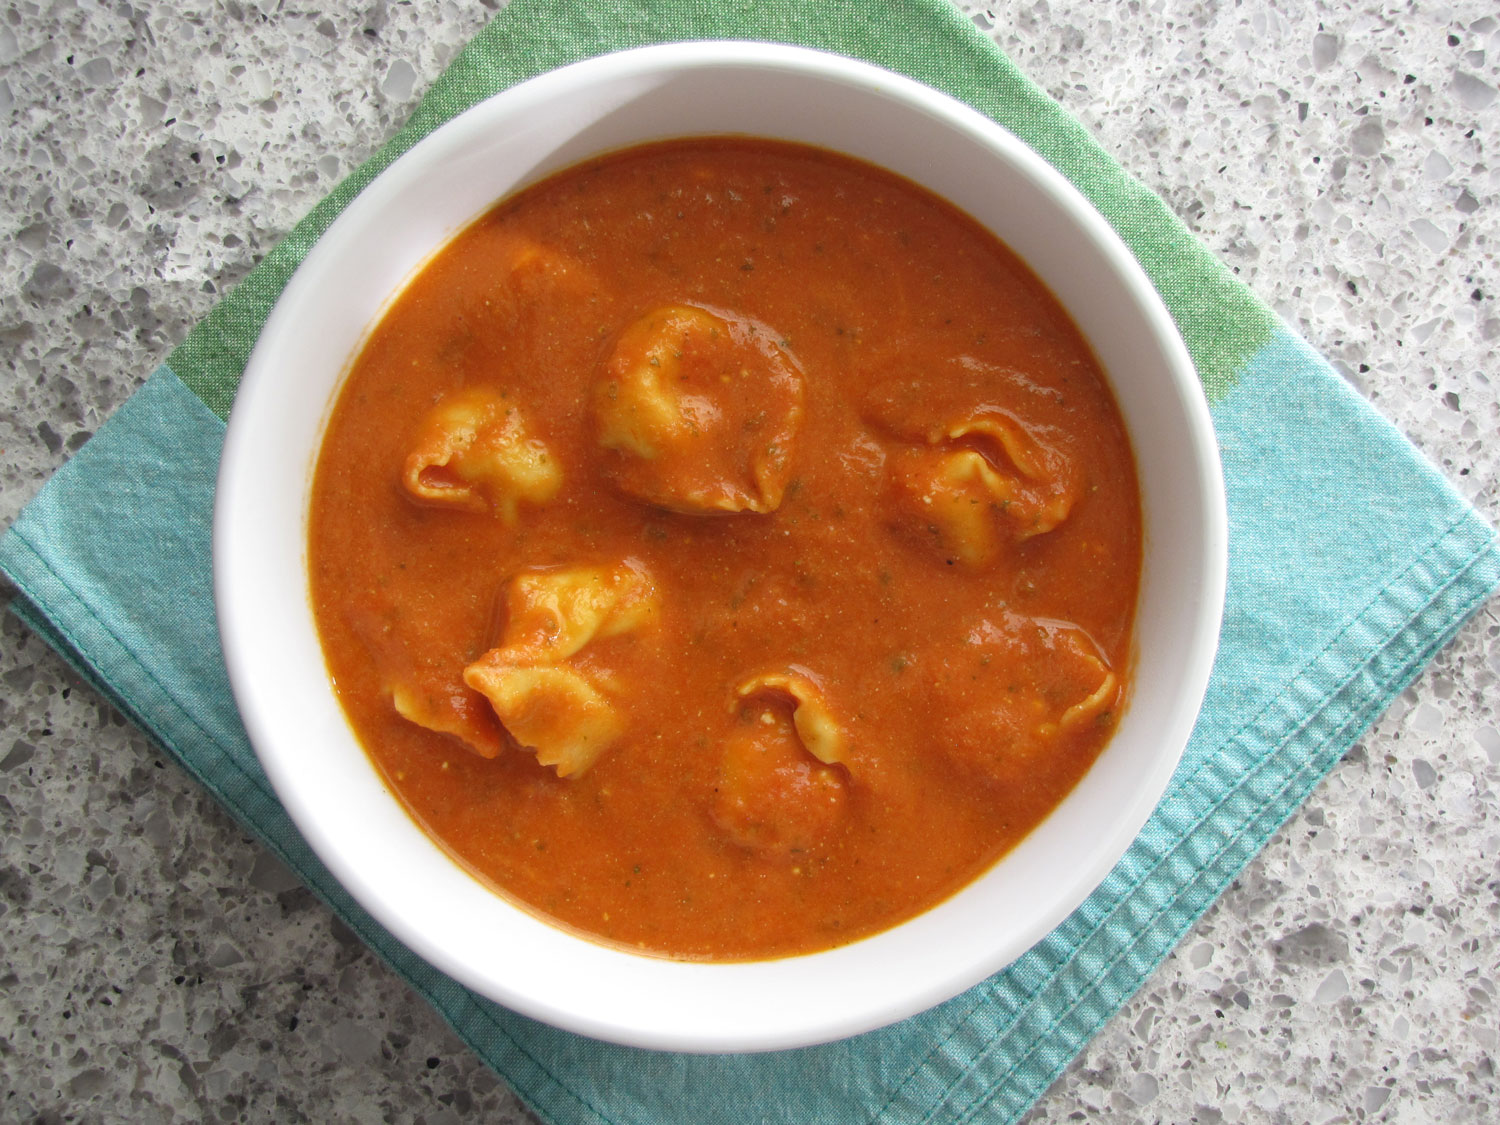 Herbed Tomato and Goat Cheese Tortellini Soup